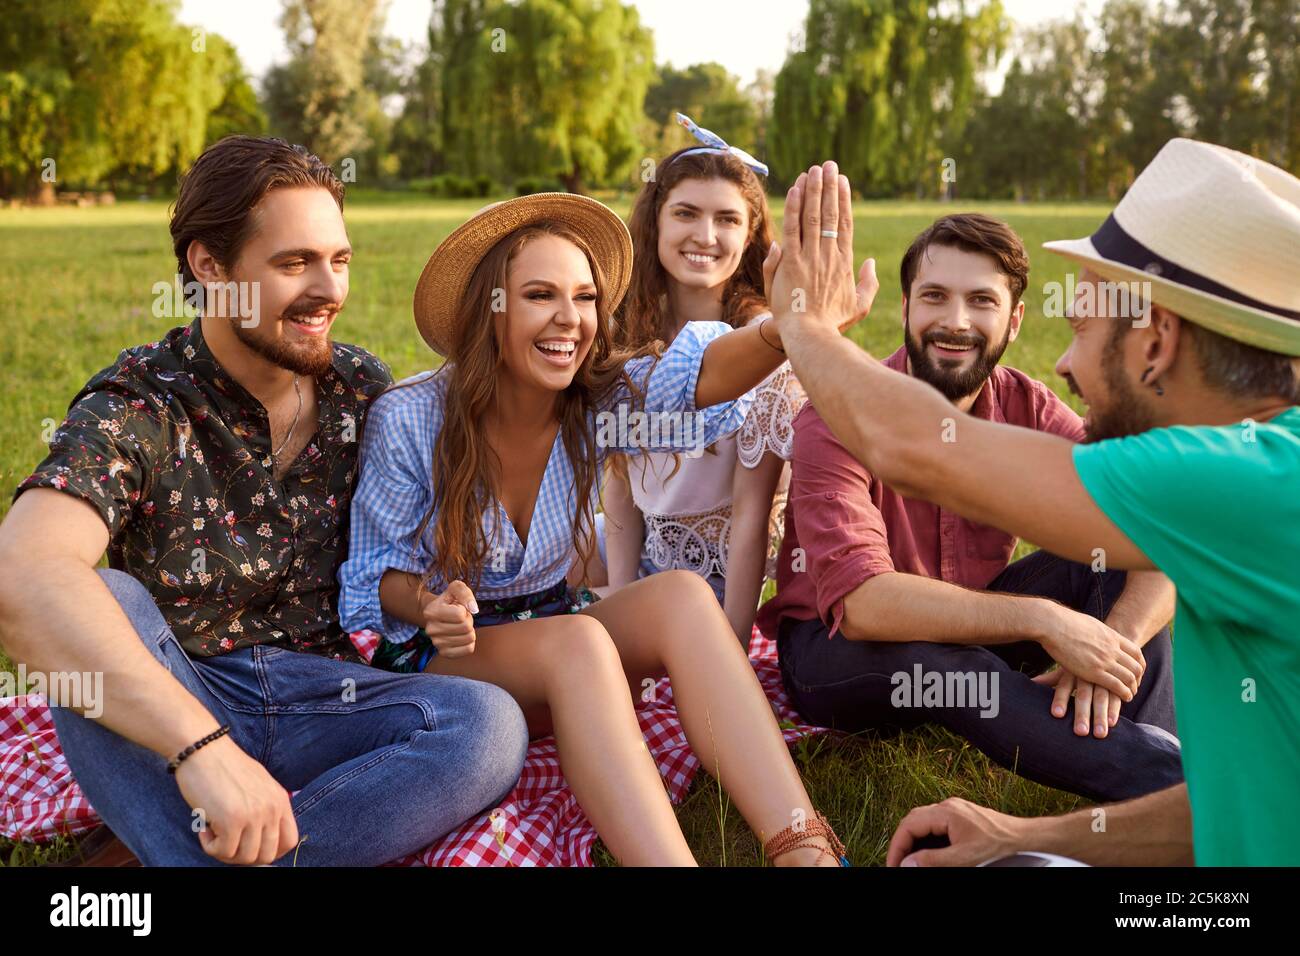 Group of friends sitting on grass, talking and high fiving in countryside. Joyful people enjoying time together outdoor in park Stock Photo